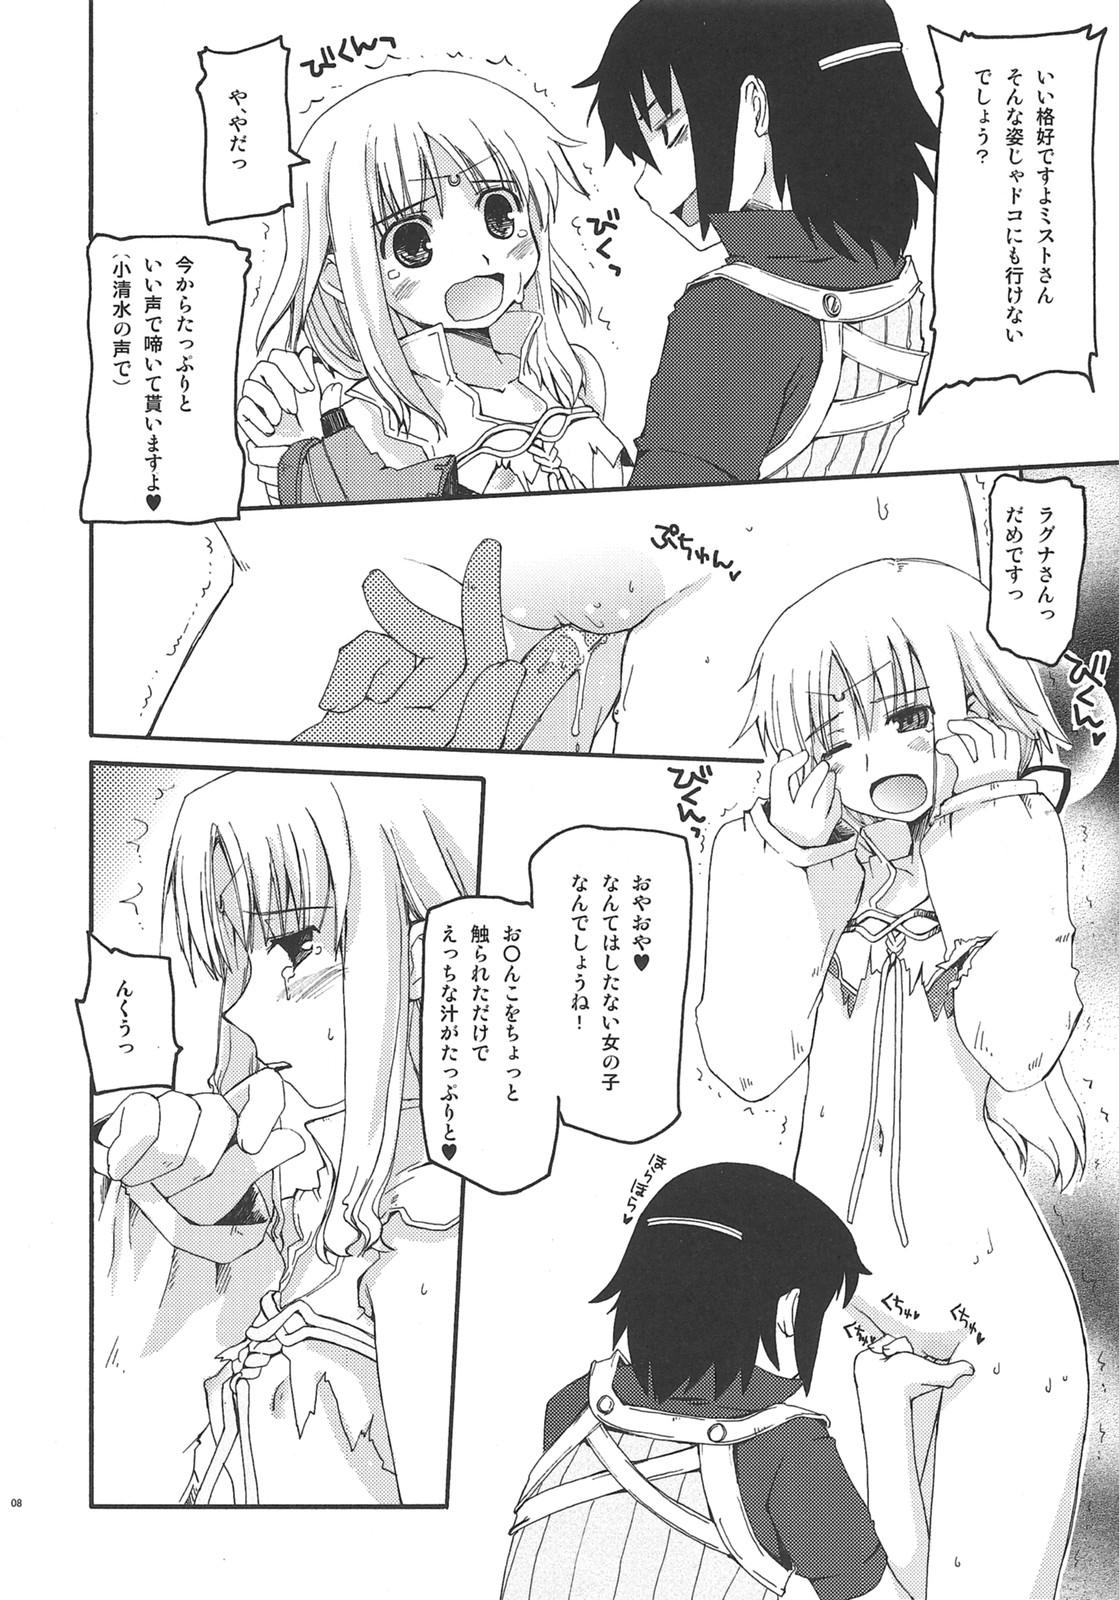 8teenxxx Walking with strangers - Rune factory Jeans - Page 7